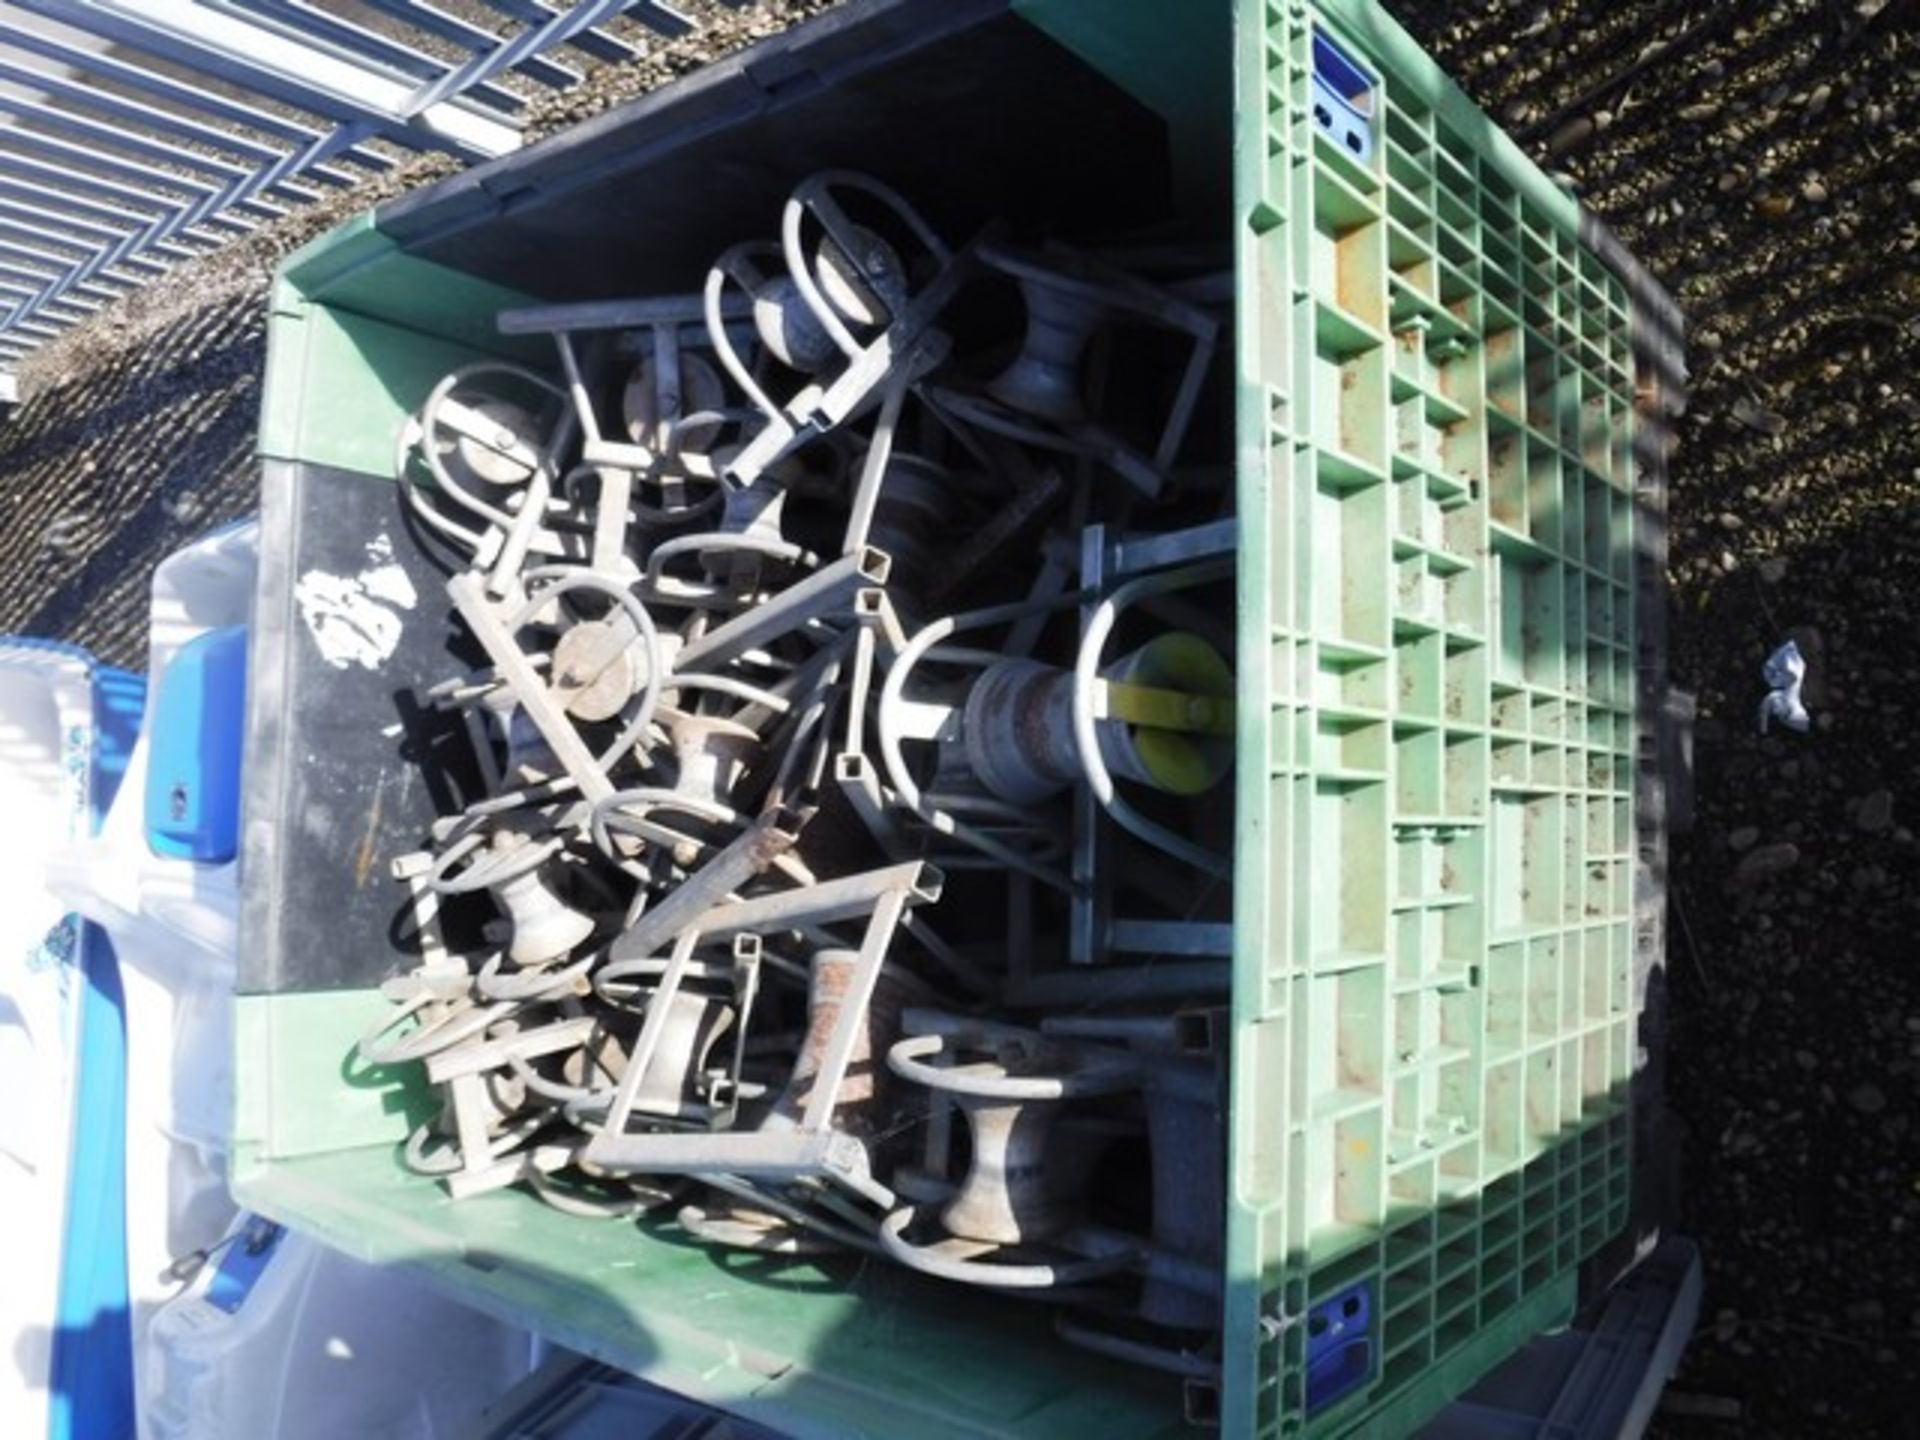 2 X CRATES OF CABLE ROLLERS & SELECTION OF STOCKINGS - Bild 2 aus 2